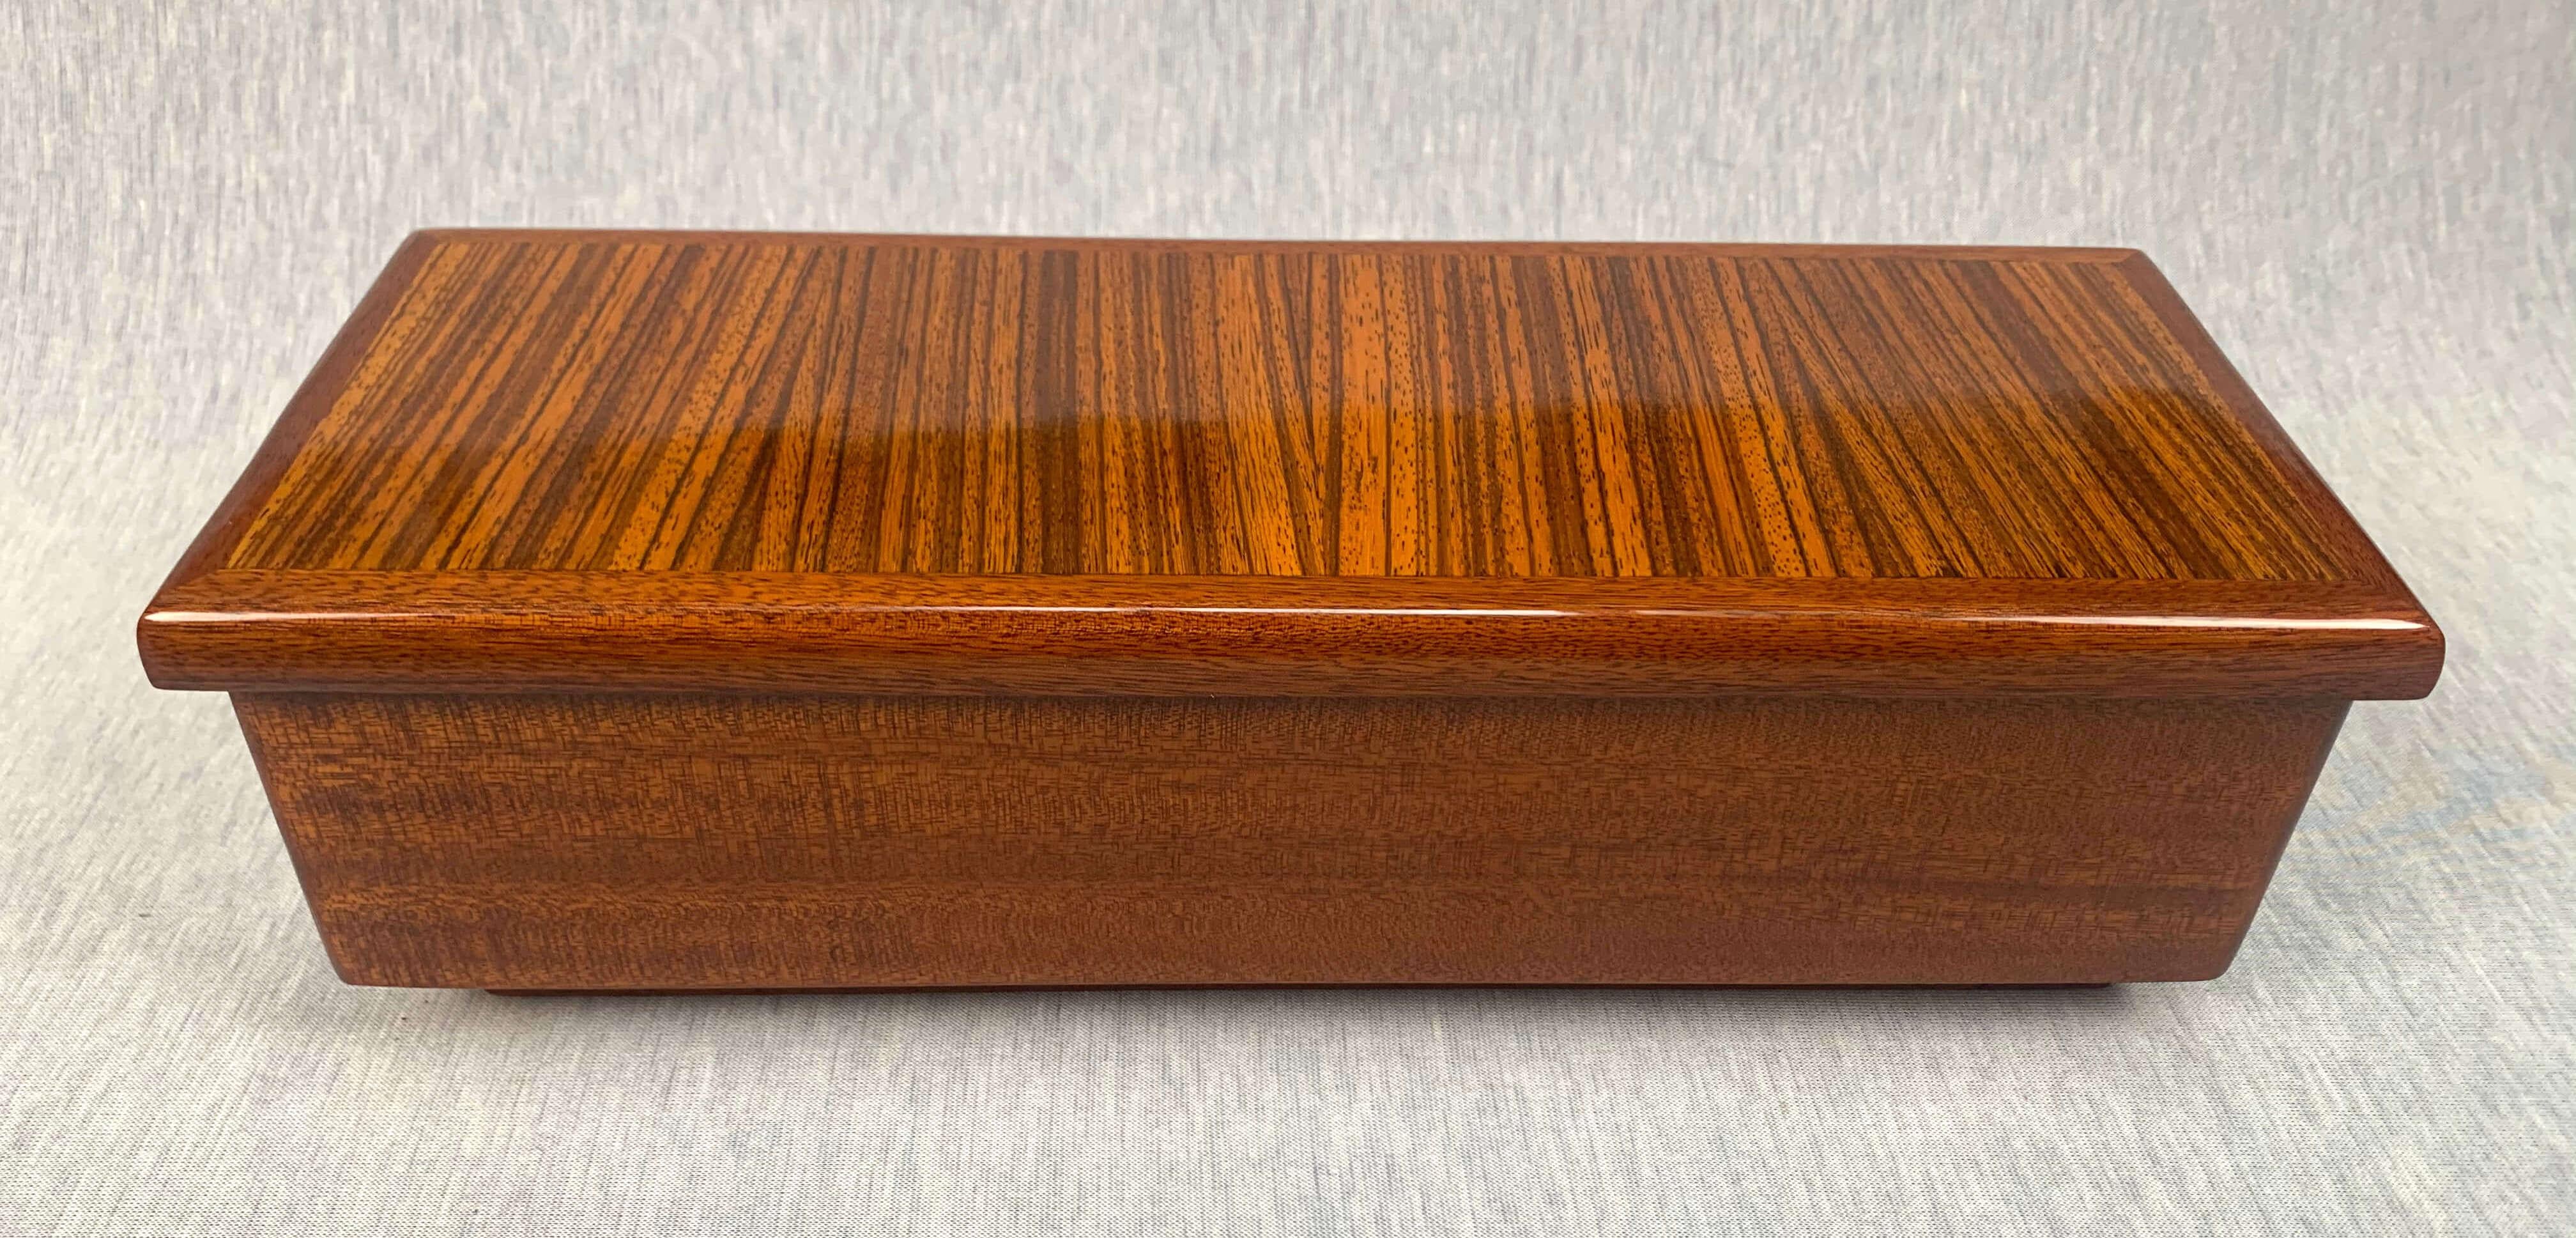 French Art Deco Game Box, Rosewood and Walnut, France, circa 1930